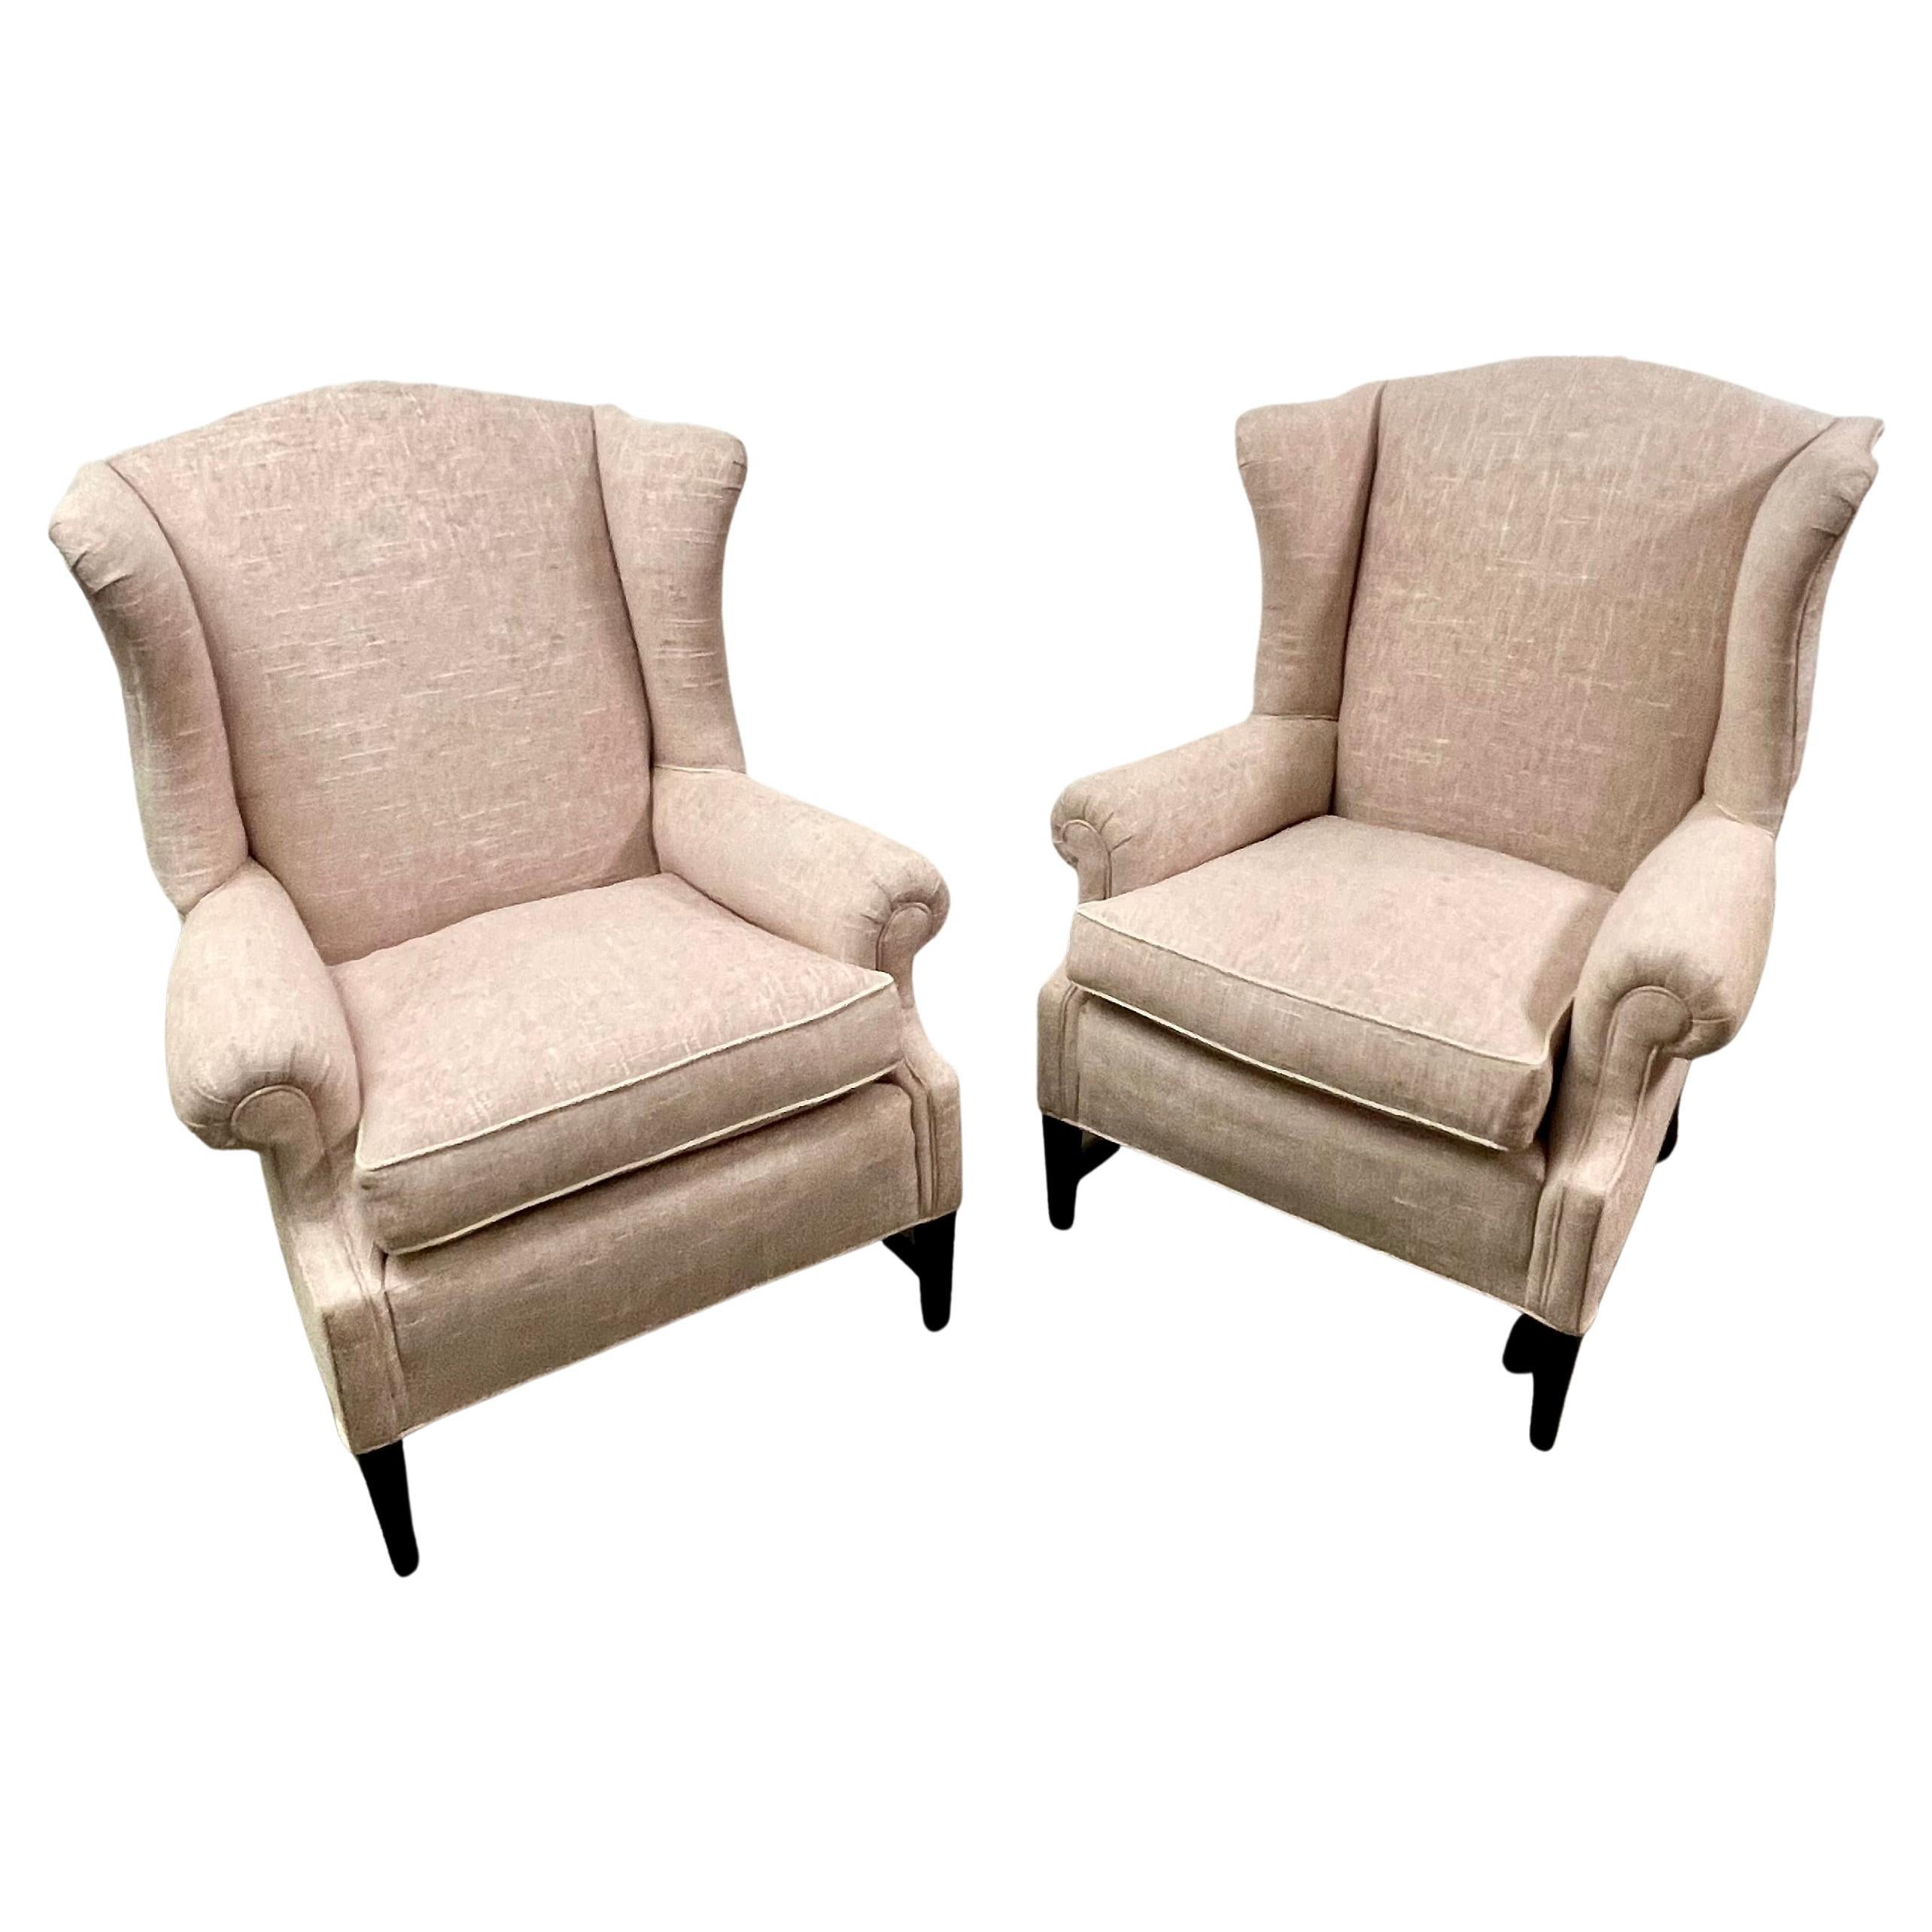 Pair of Georgian Style Wingback Chairs Upholstered in Linen